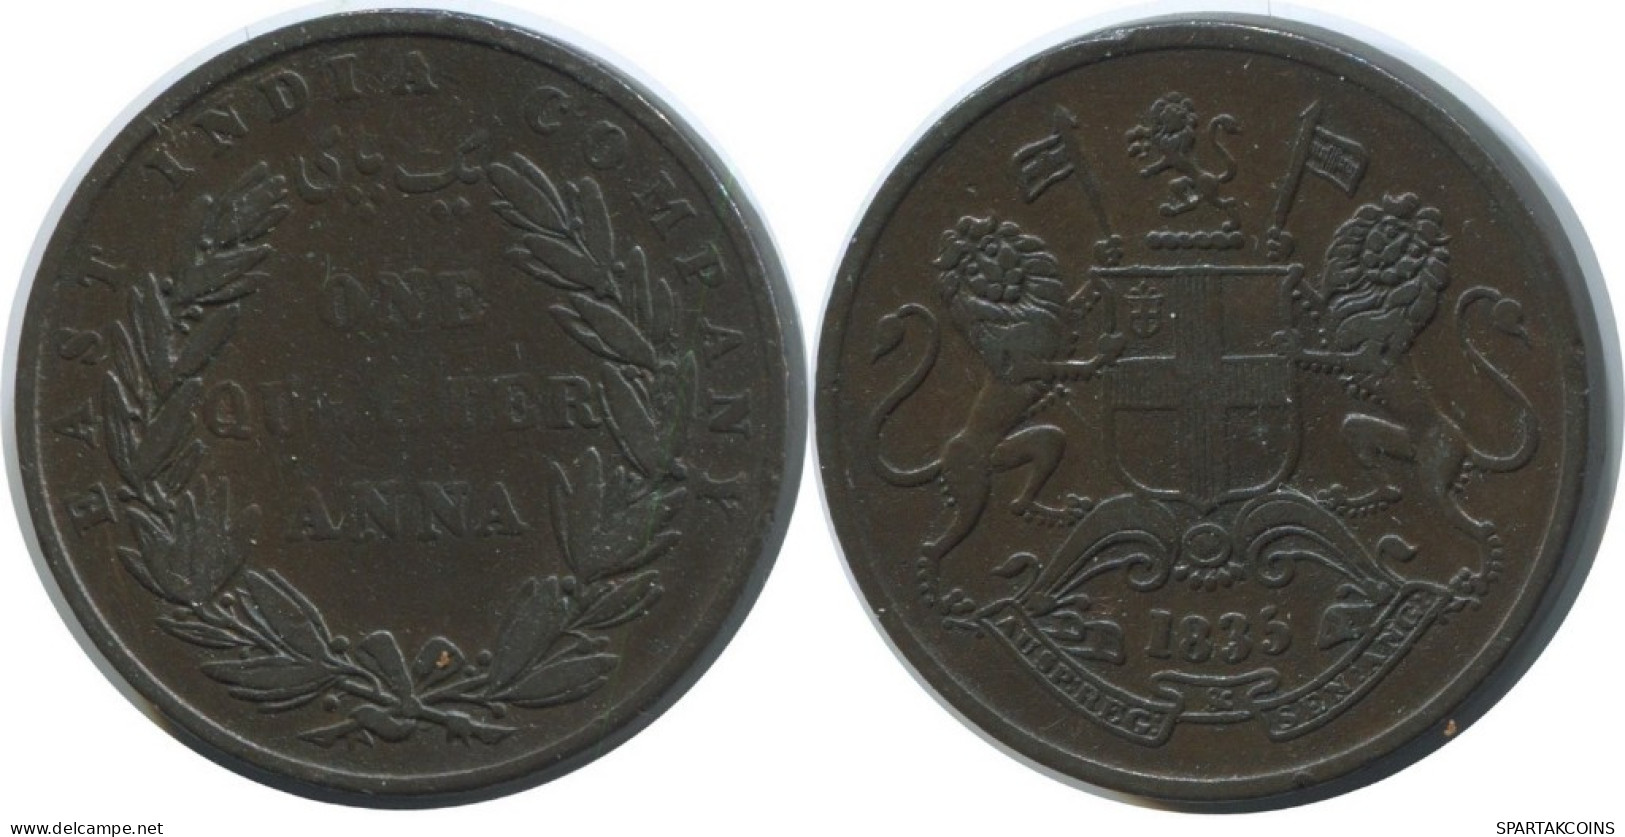 1/4 ANNA 1835 INDE INDIA - BRITISH East INDE INDIA Company Pièce #AE780.16.F.A - Indien